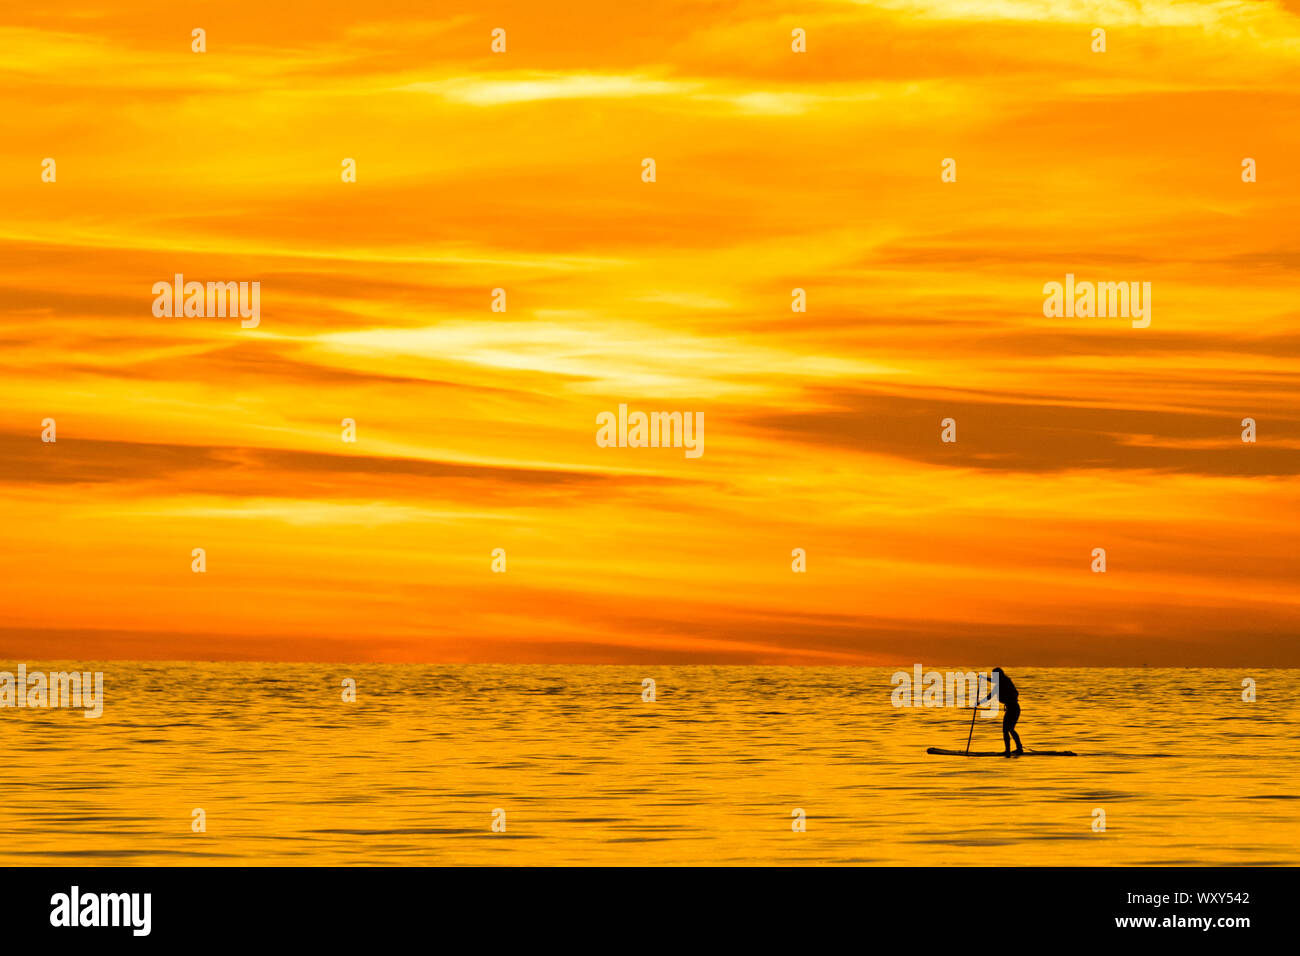 Aberystwyth, UK. 18th Sep, 2019. Aberystwyth Wales UK, Wednesday 18 September 2019 The sun setting gloriously over  Cardigan Bay silhouettes a person paddle-boarding on the calm sea the end of a day of unbroken clear blue skies and warm September sunshine in Aberystwyth ,  as the ‘indian summer’ mini heat-wave continues over much of the souther parts of the UK   Credit: keith morris/Alamy Live News Stock Photo